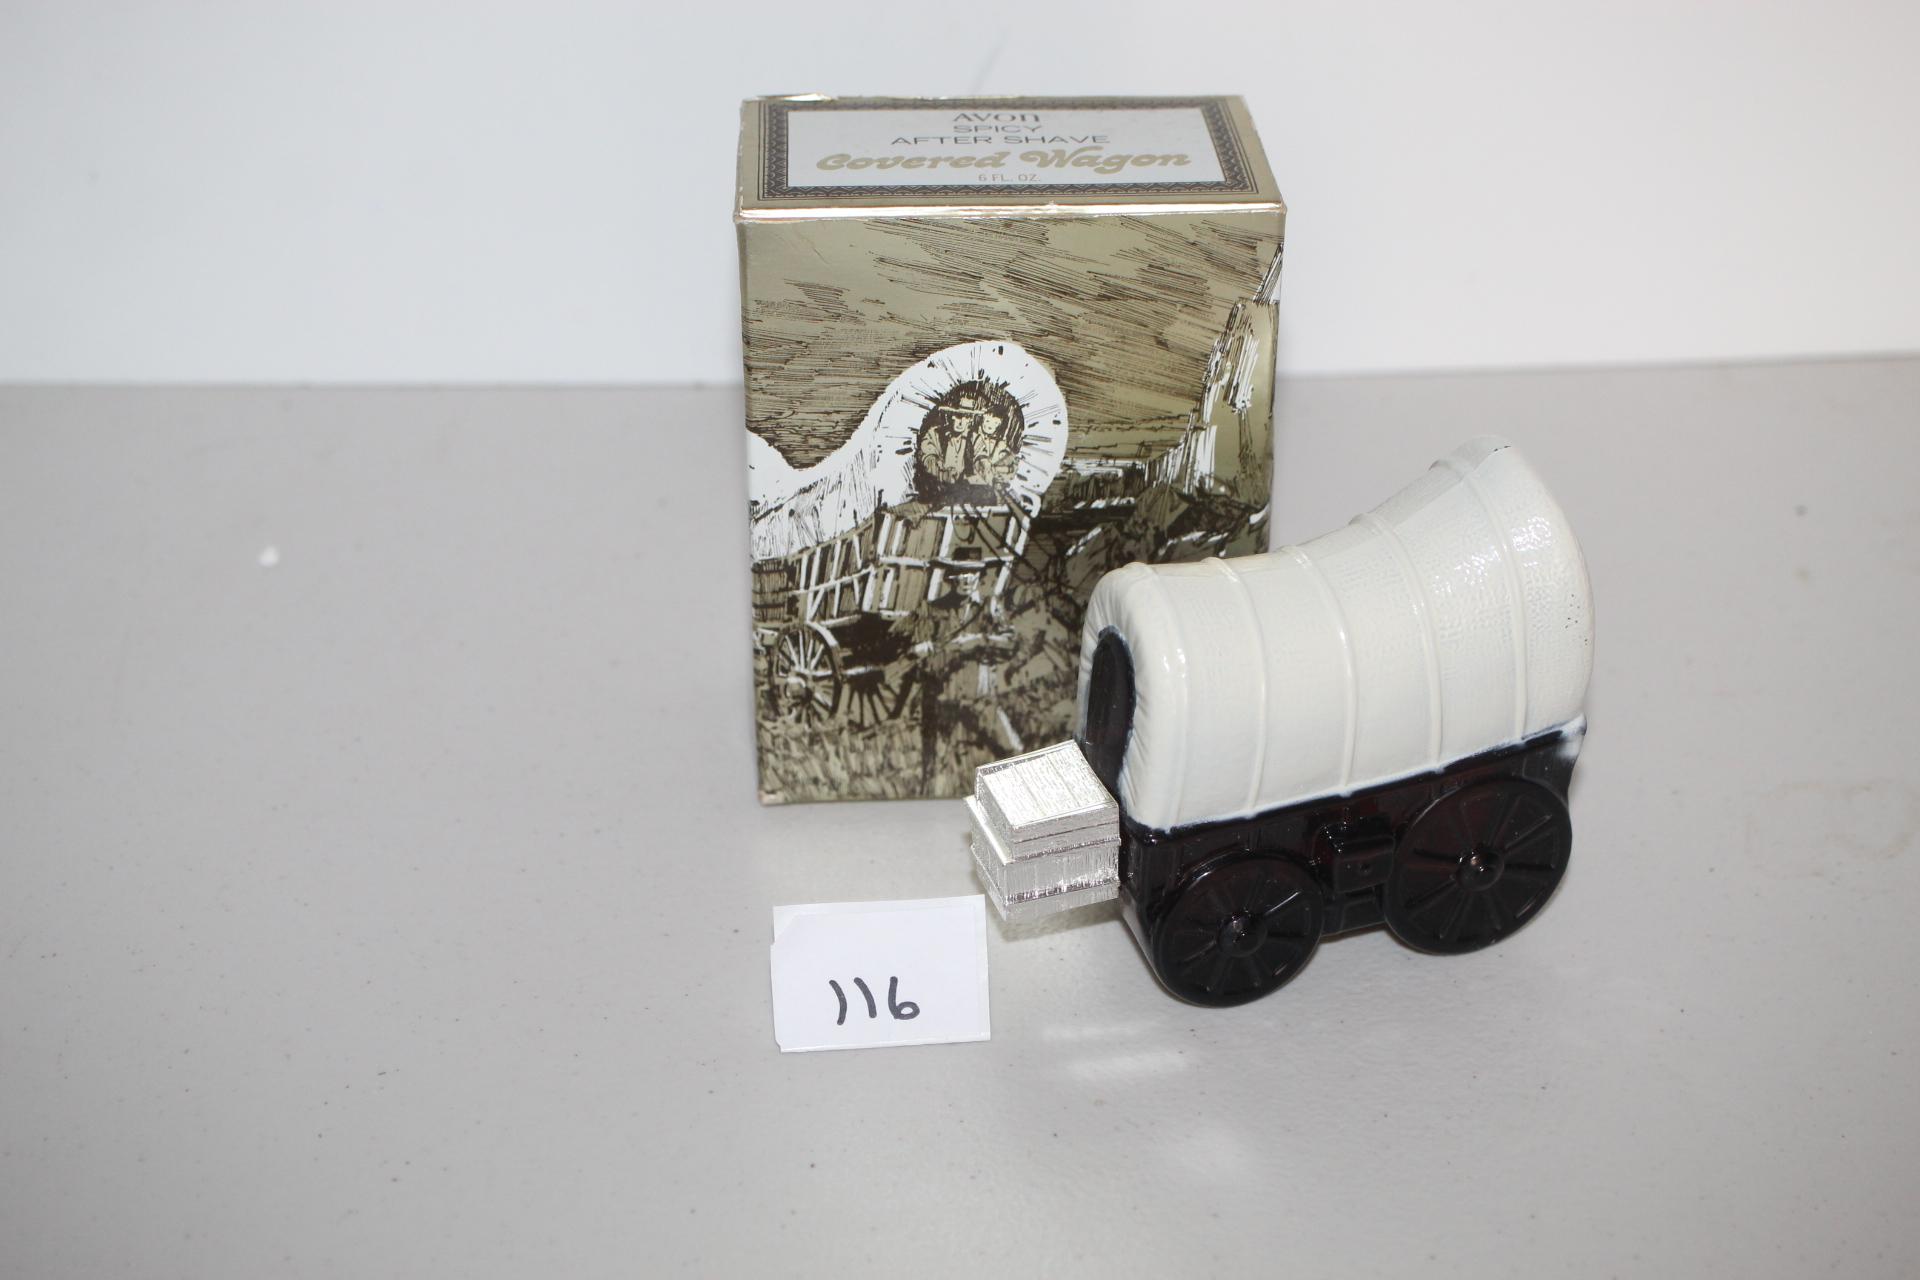 Vintage Avon Spicy After Shave Covered Wagon Bottle, Not Empty, 4 1/2"